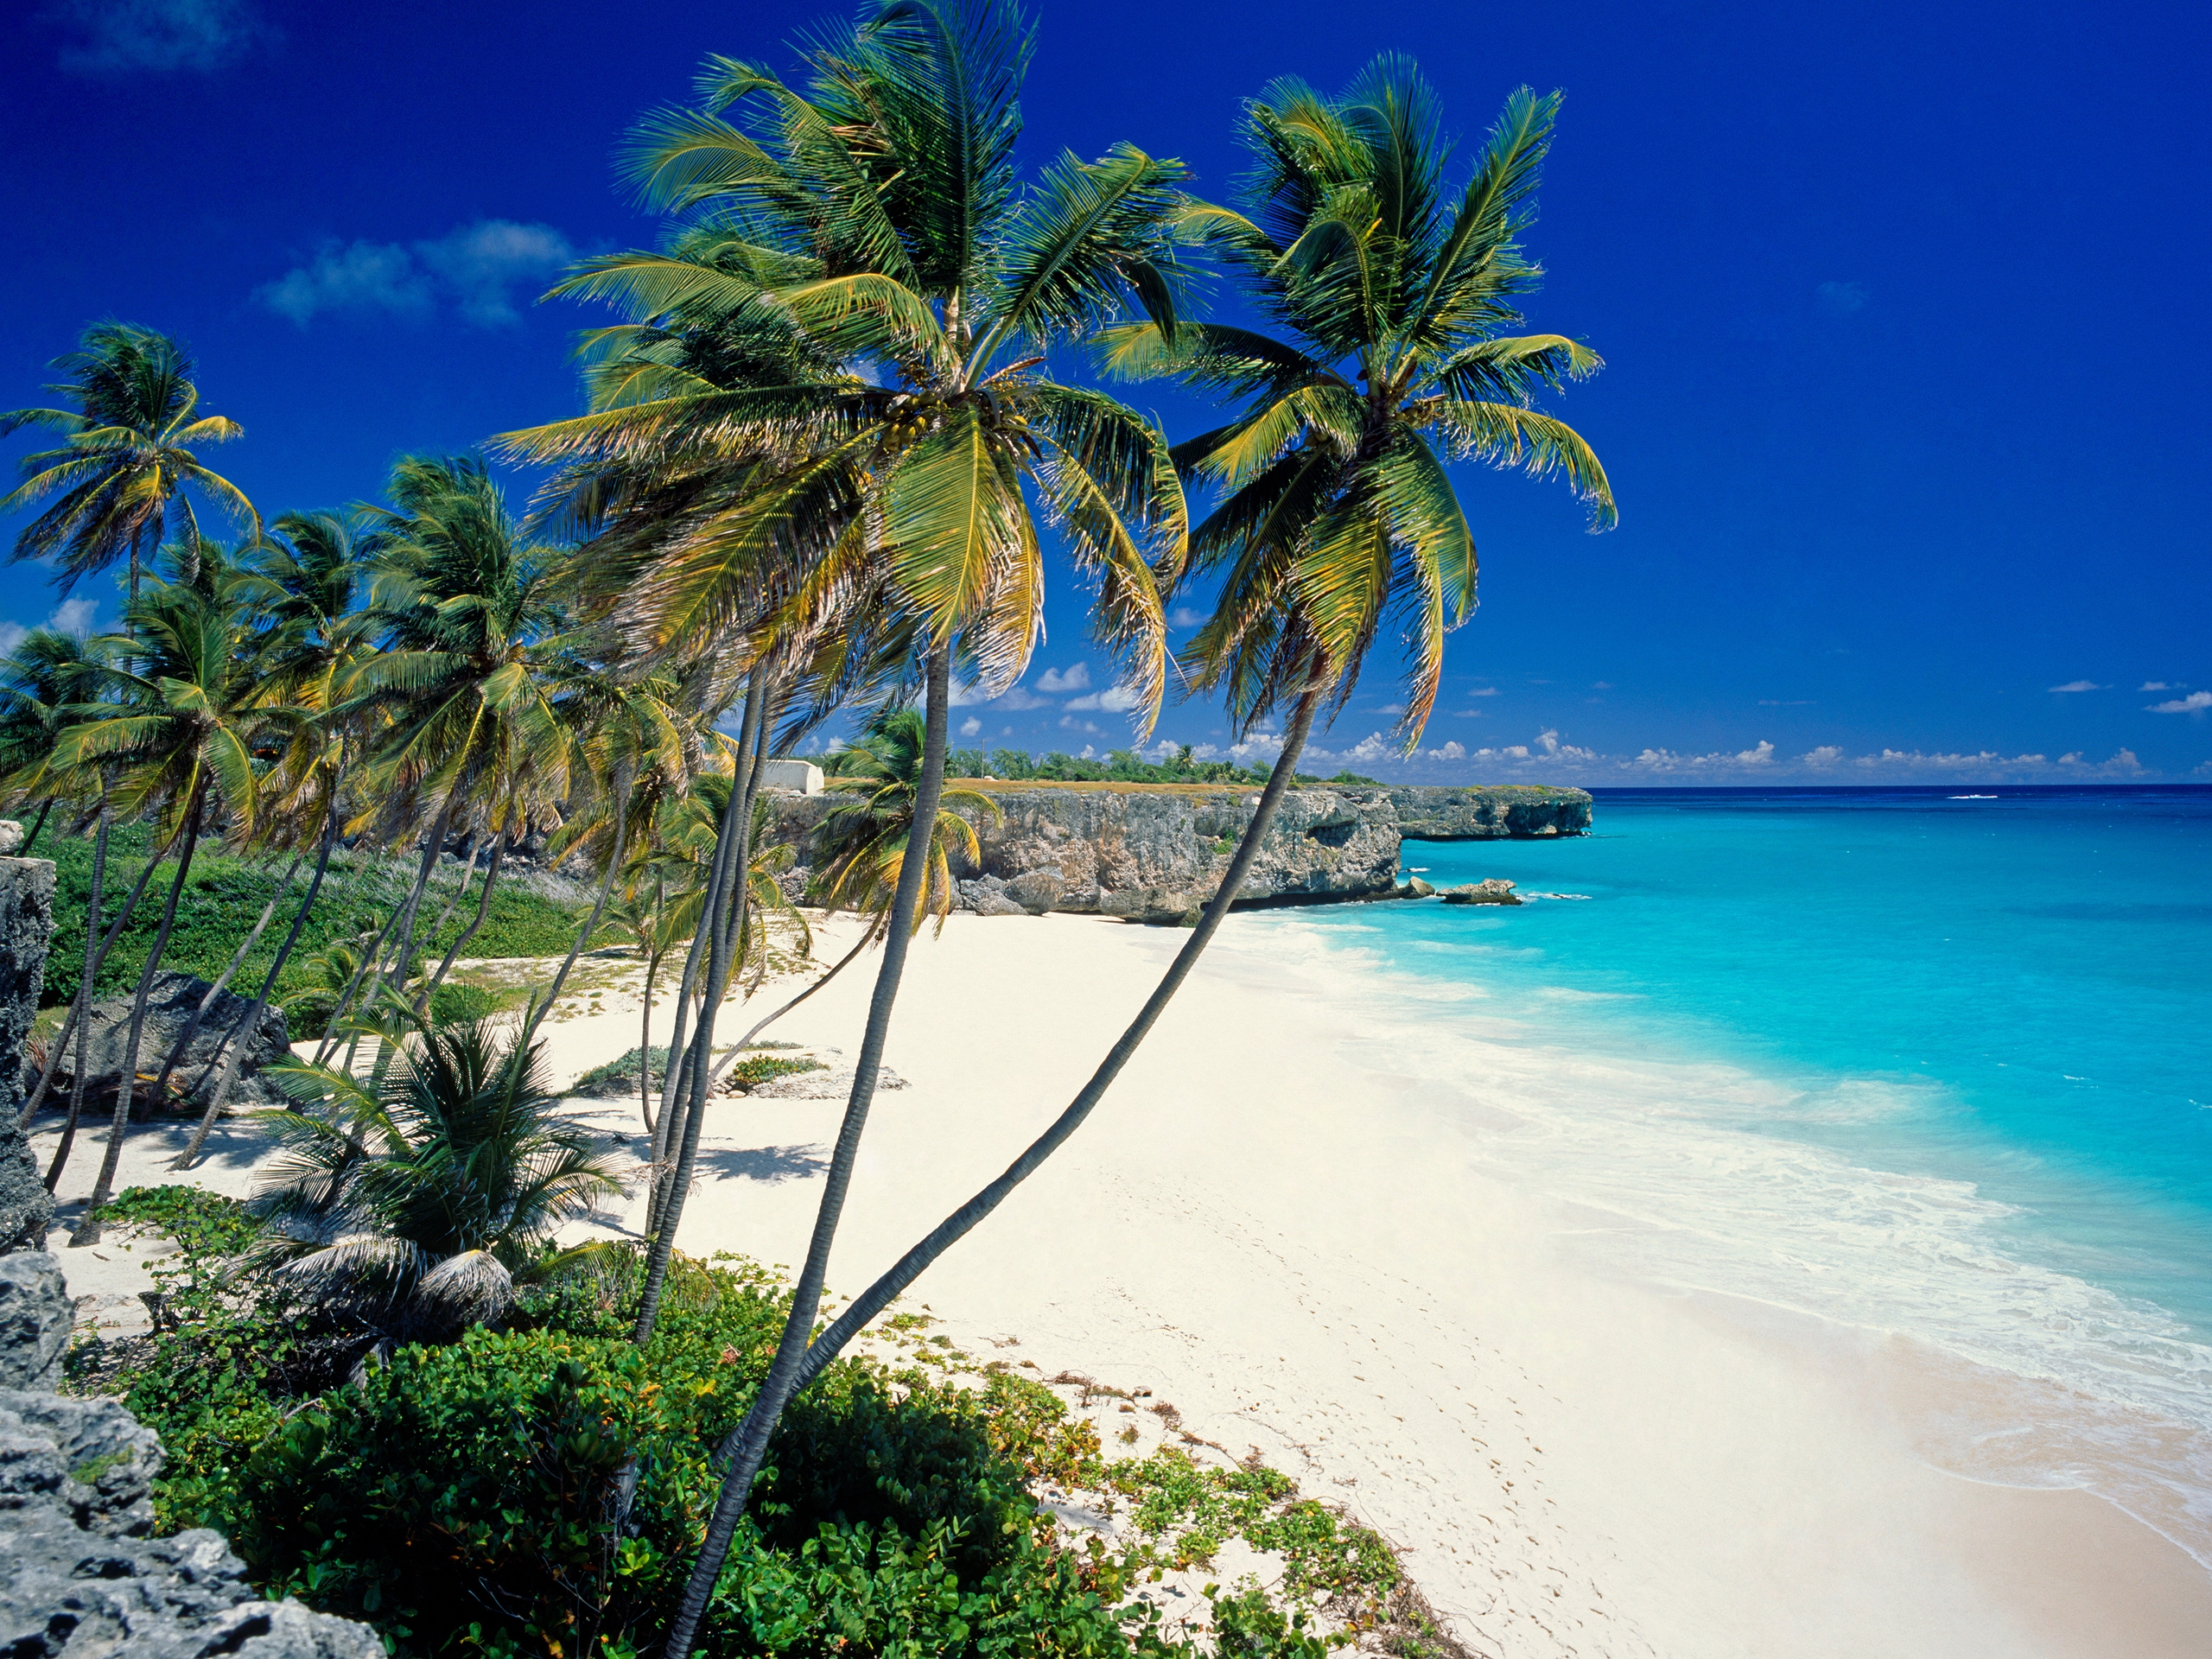 Windows Backgrounds nature, sea, beach, sand, palms, tropics, handsomely, it's beautiful